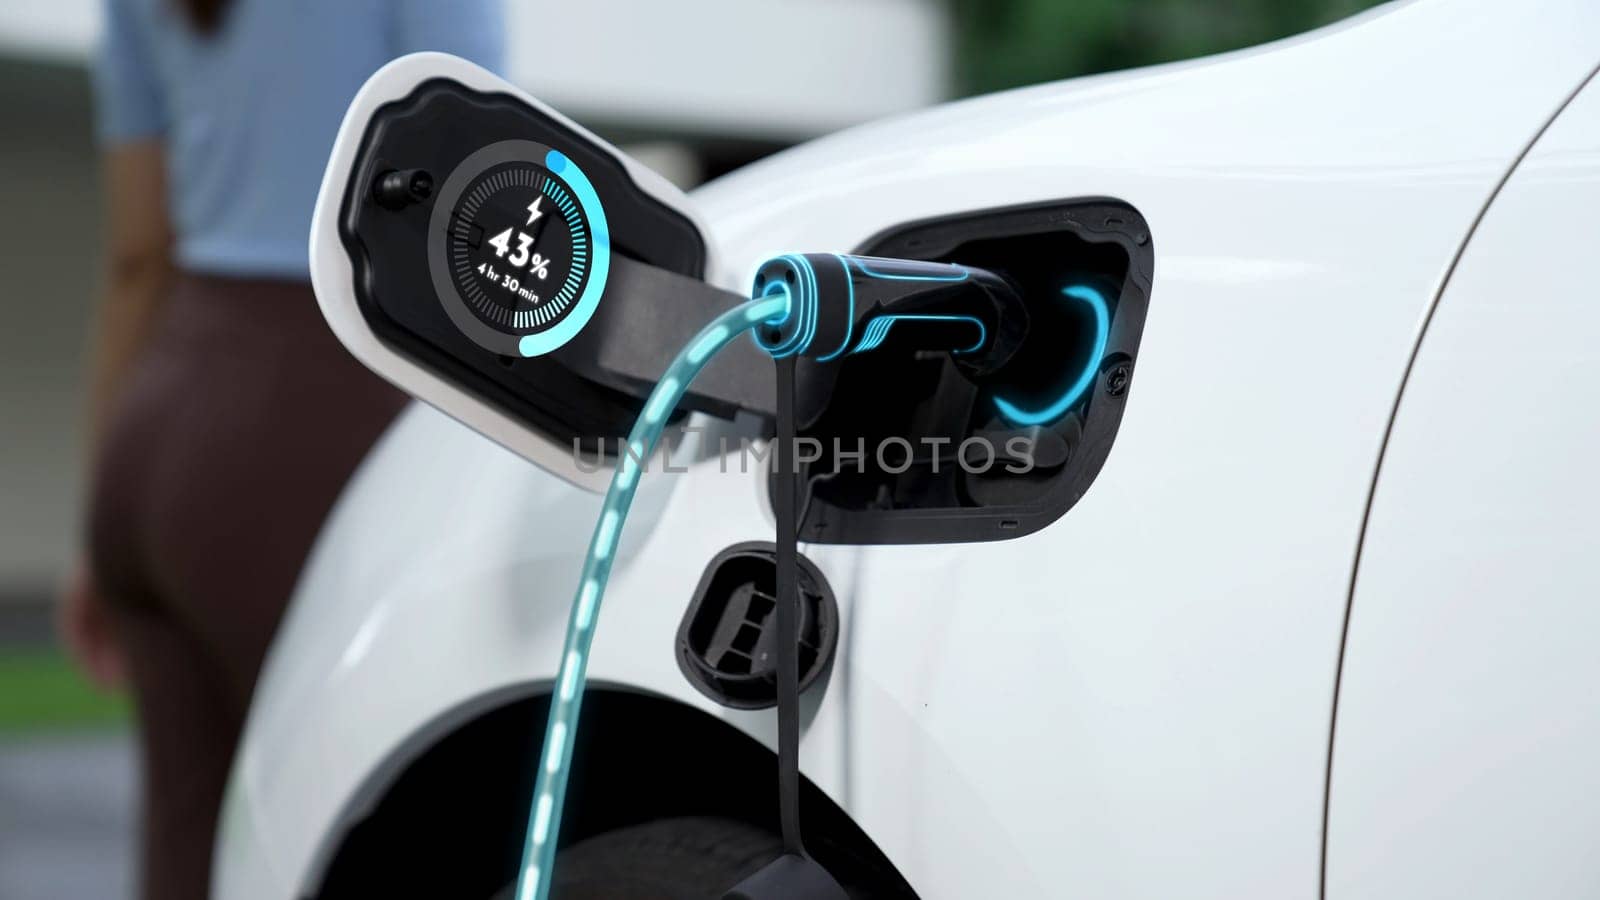 EV charger from home charging station plugged in EV car. Peruse by biancoblue